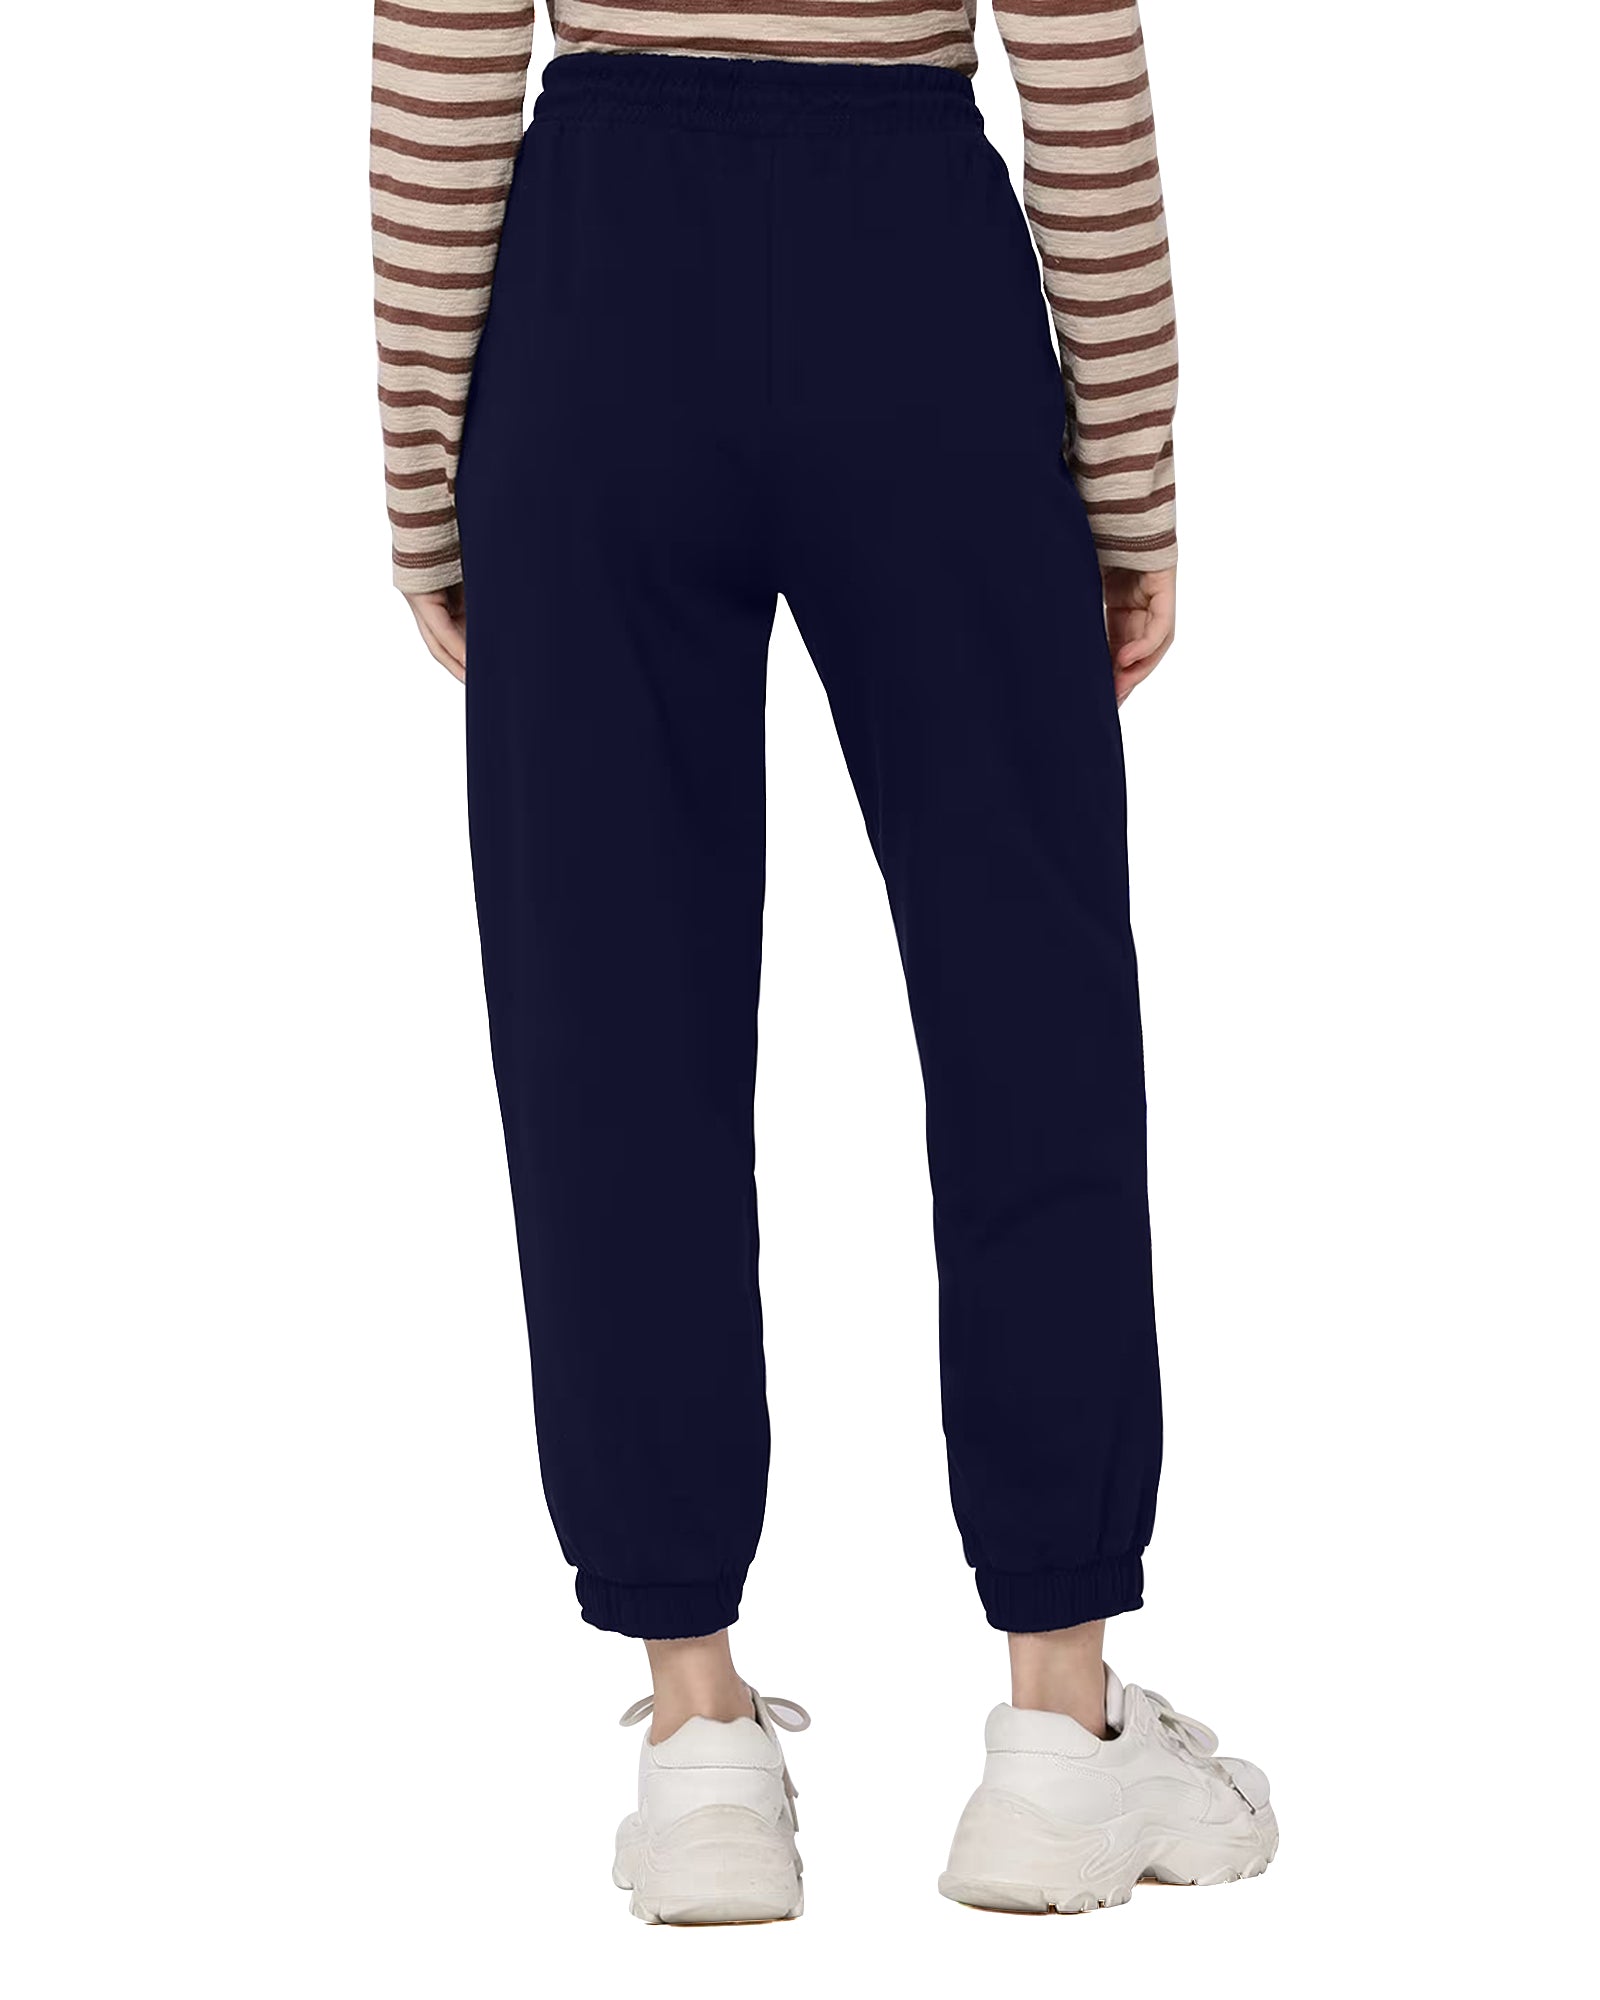 Women's Branded Solid Jogger